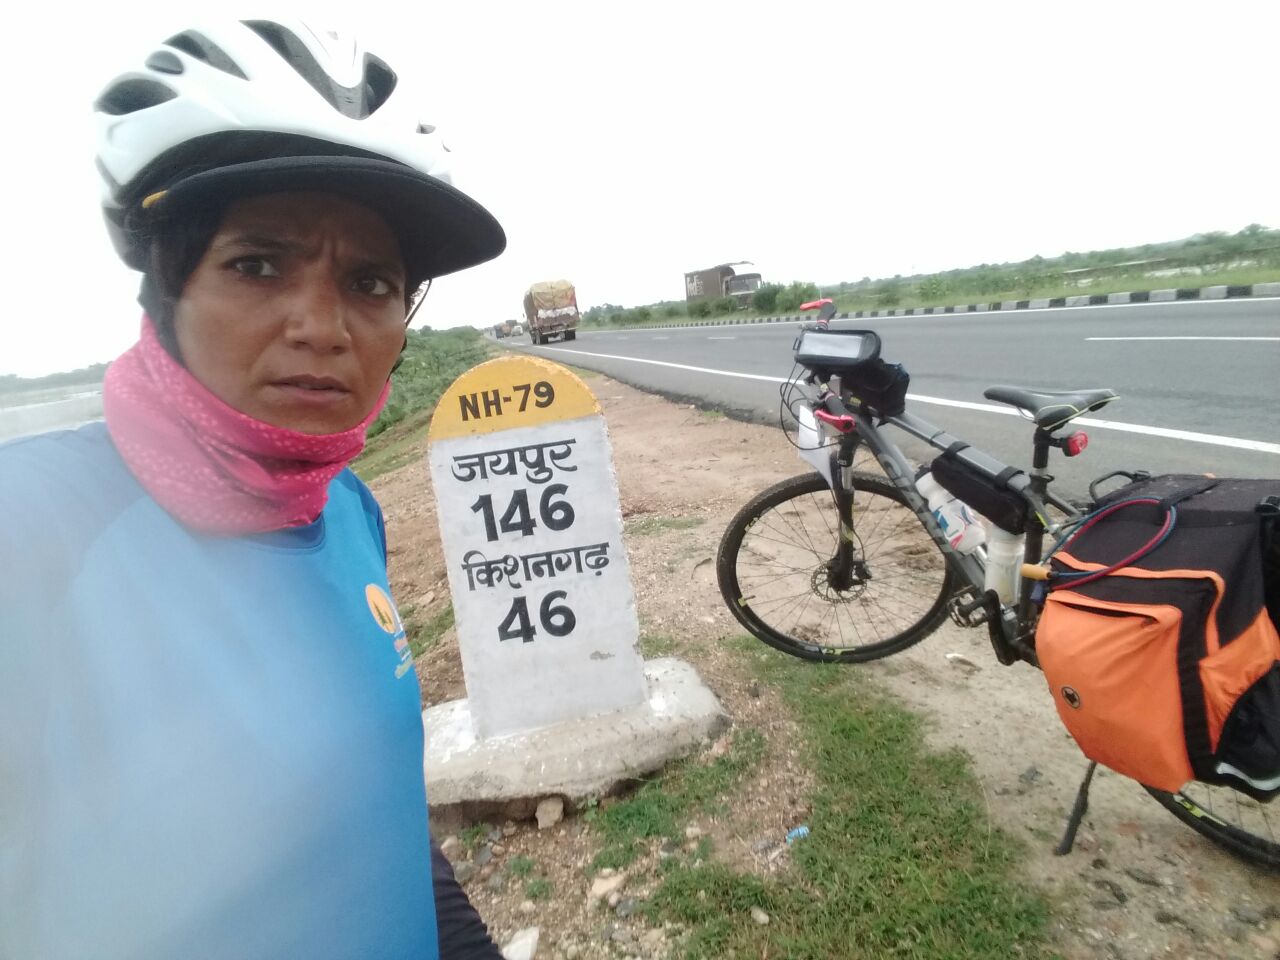 Nearing the destination - Solo Cycling Expedition